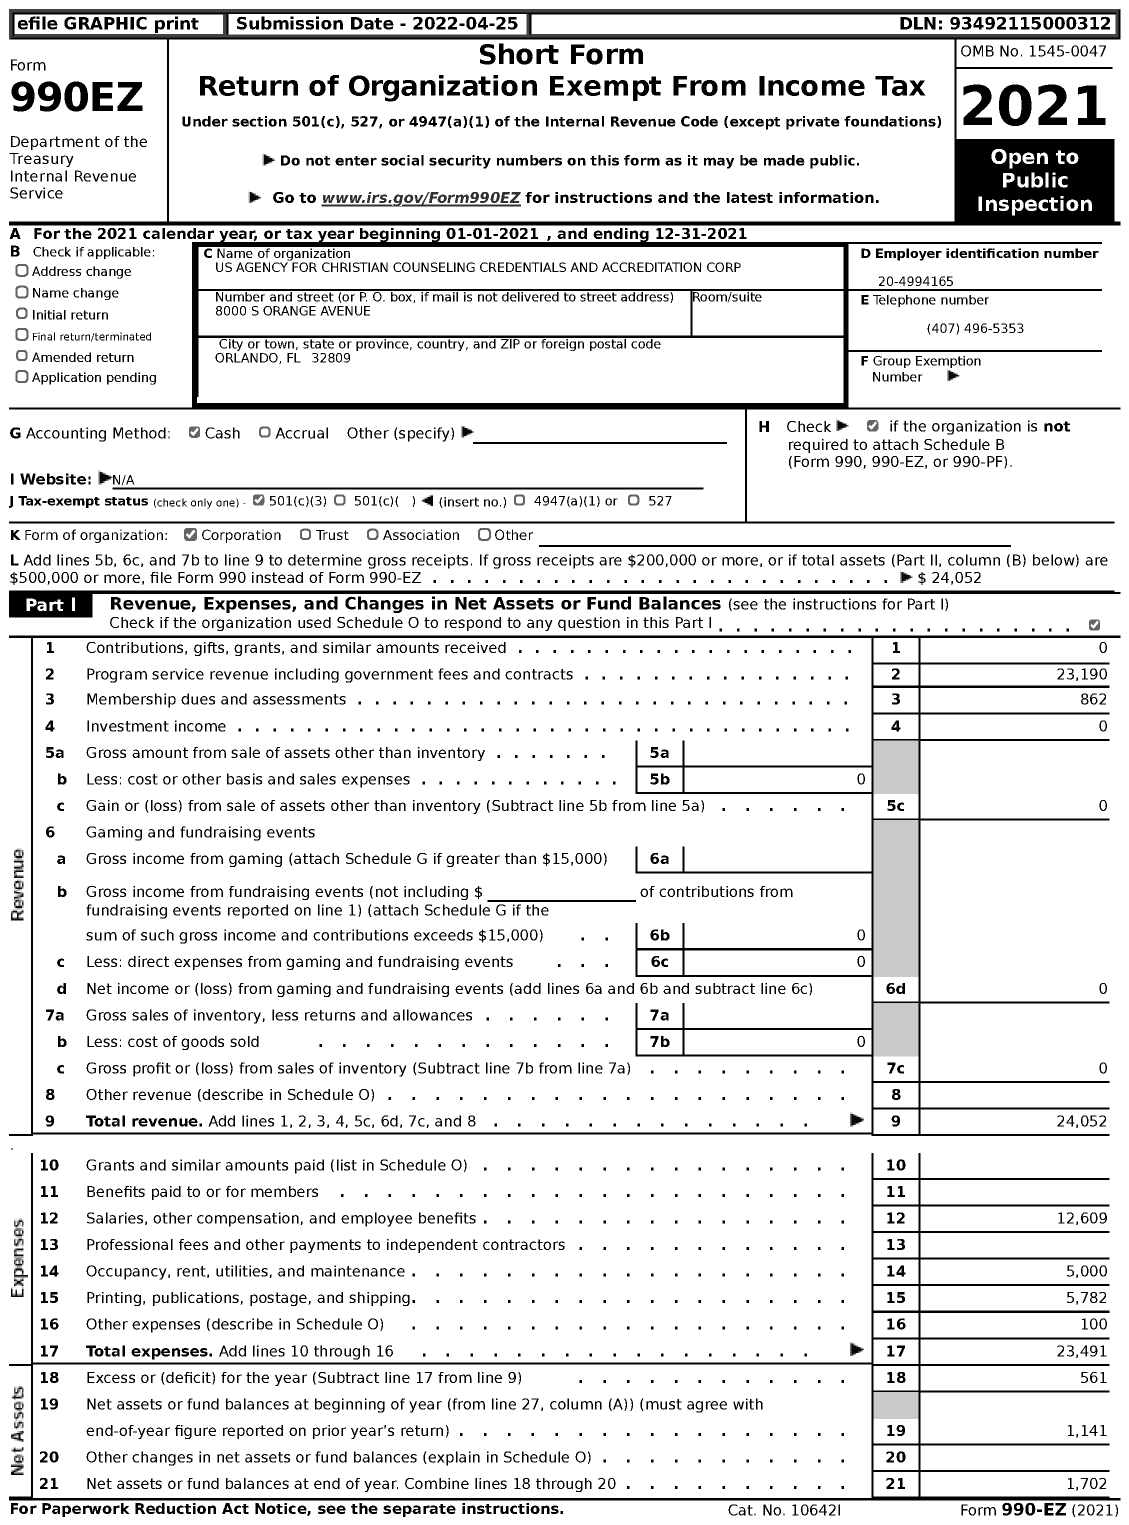 Image of first page of 2021 Form 990EZ for Us Agency for Christian Counseling Credentials and Accreditation Corporation